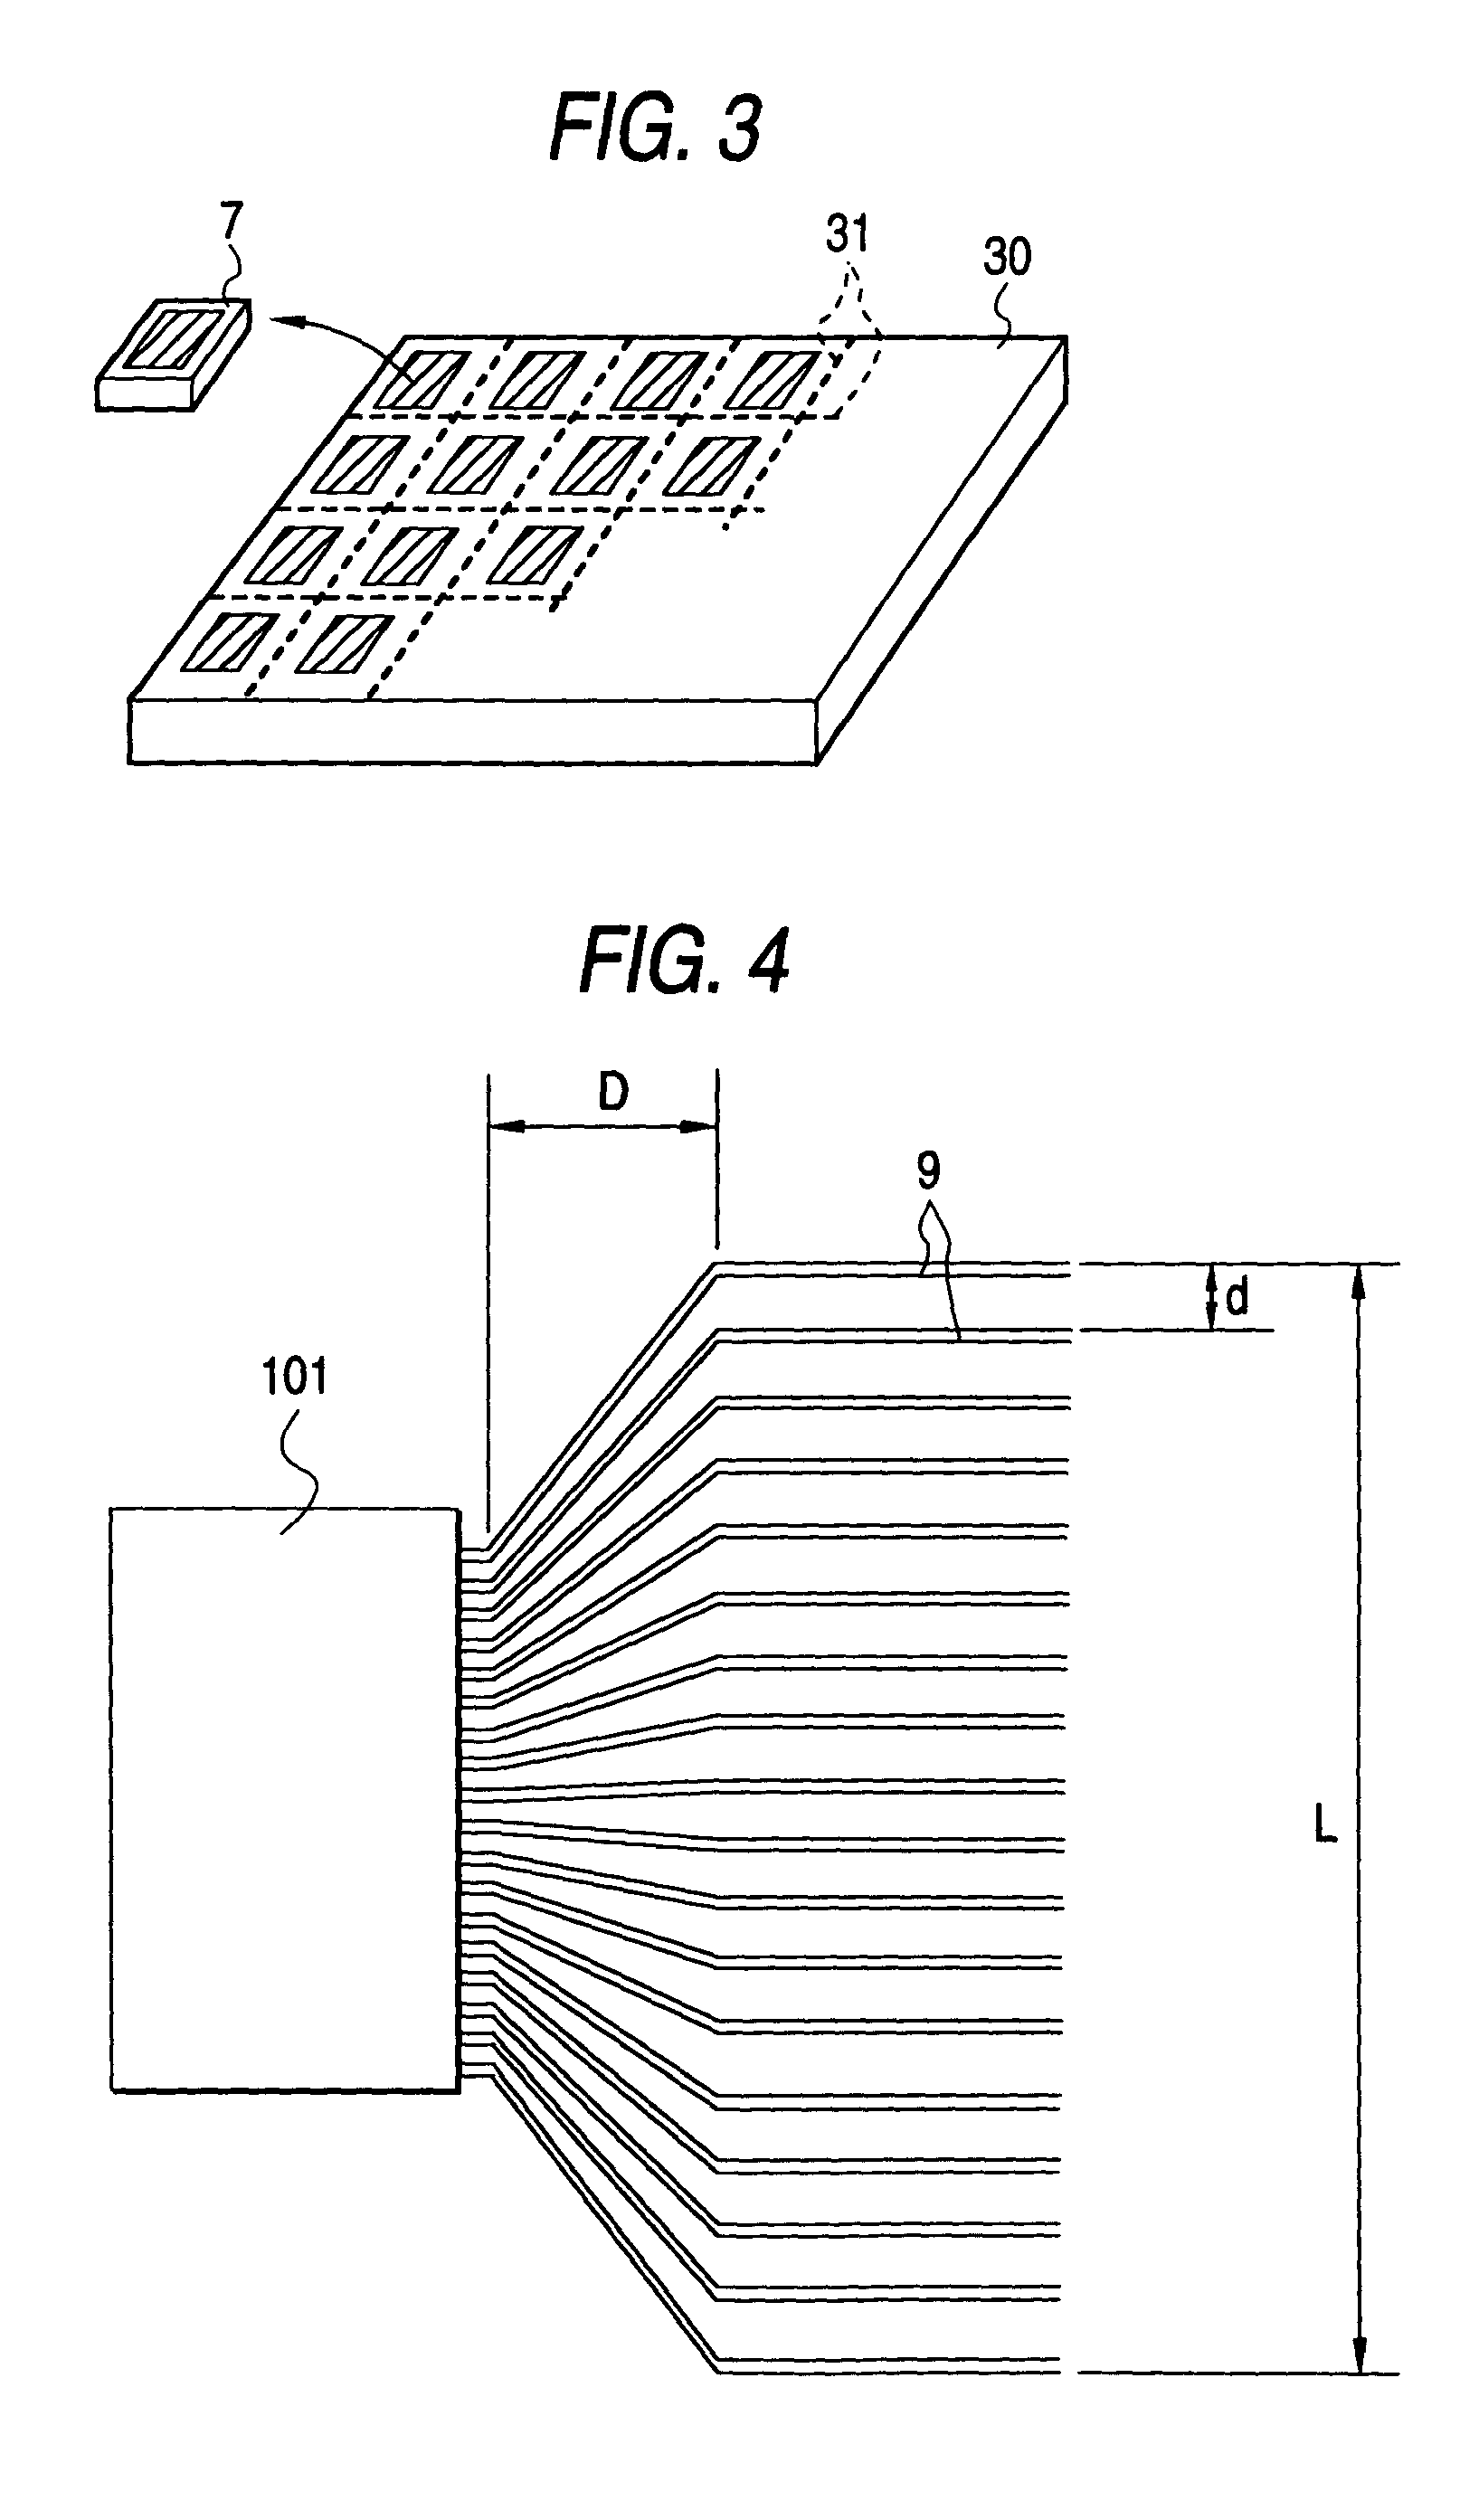 IC substrate of glass and display device